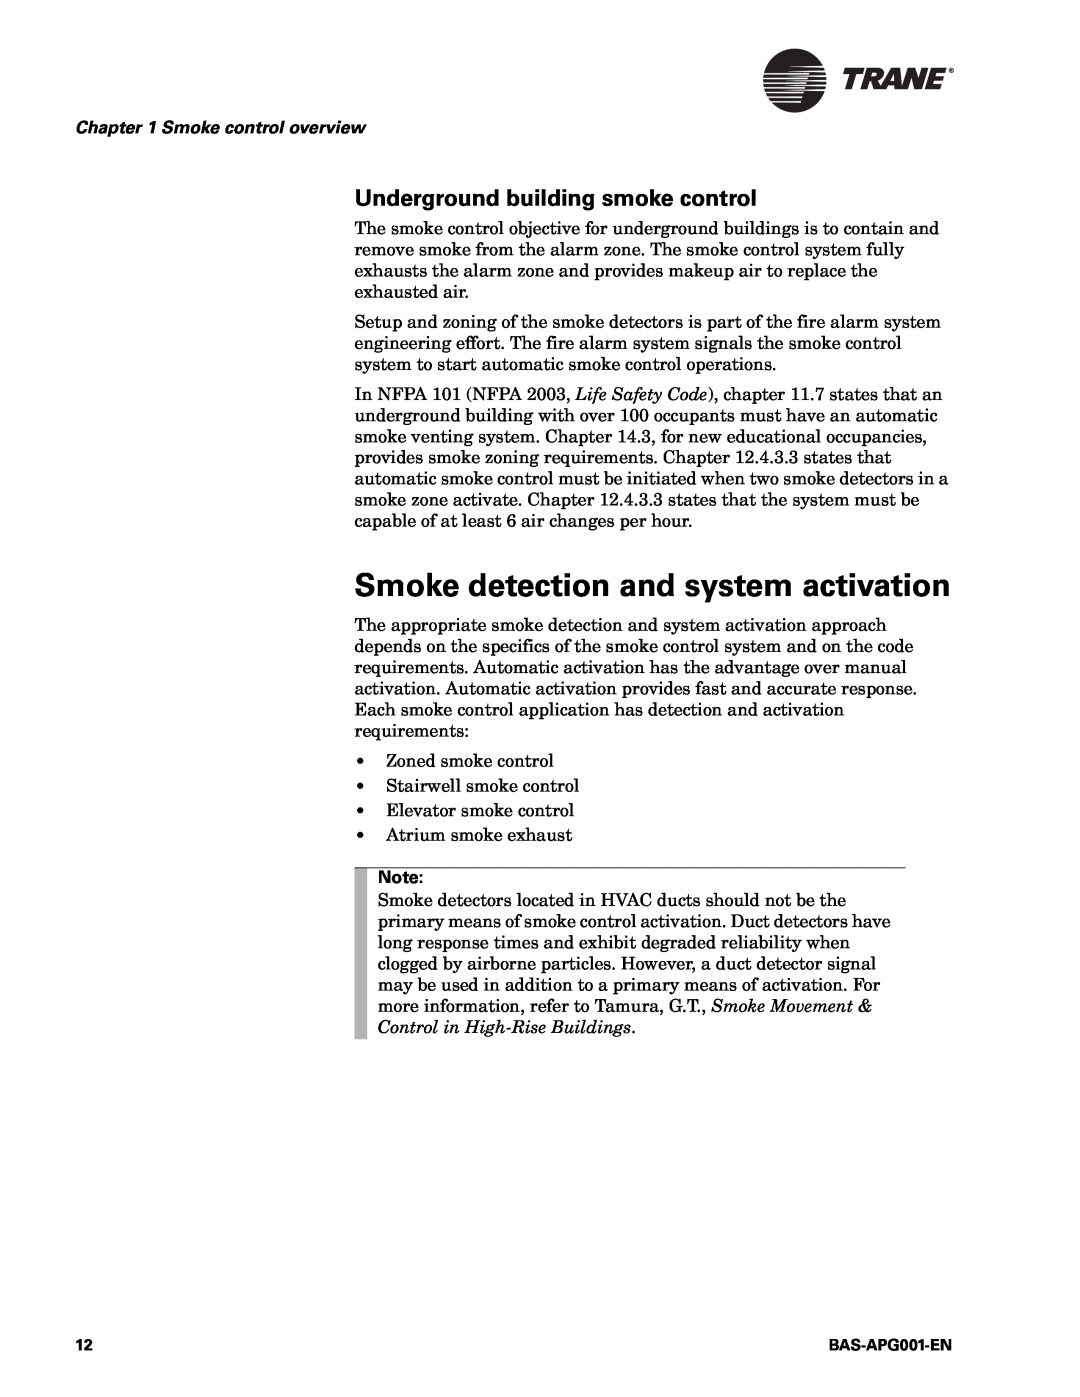 Trane BAS-APG001-EN Smoke detection and system activation, Underground building smoke control, Smoke control overview 